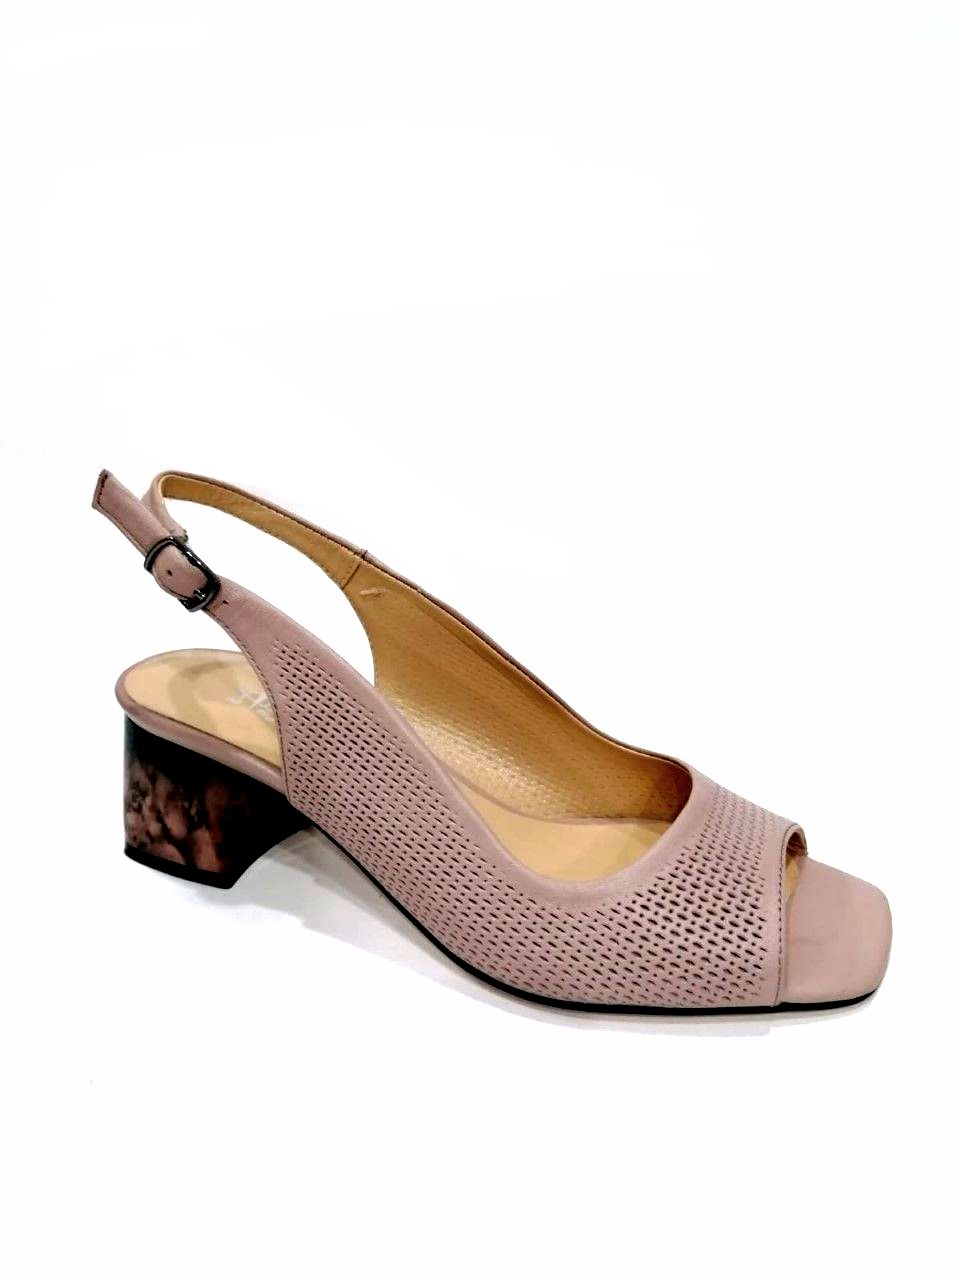 mink color  leather sandals with beautiful perforation